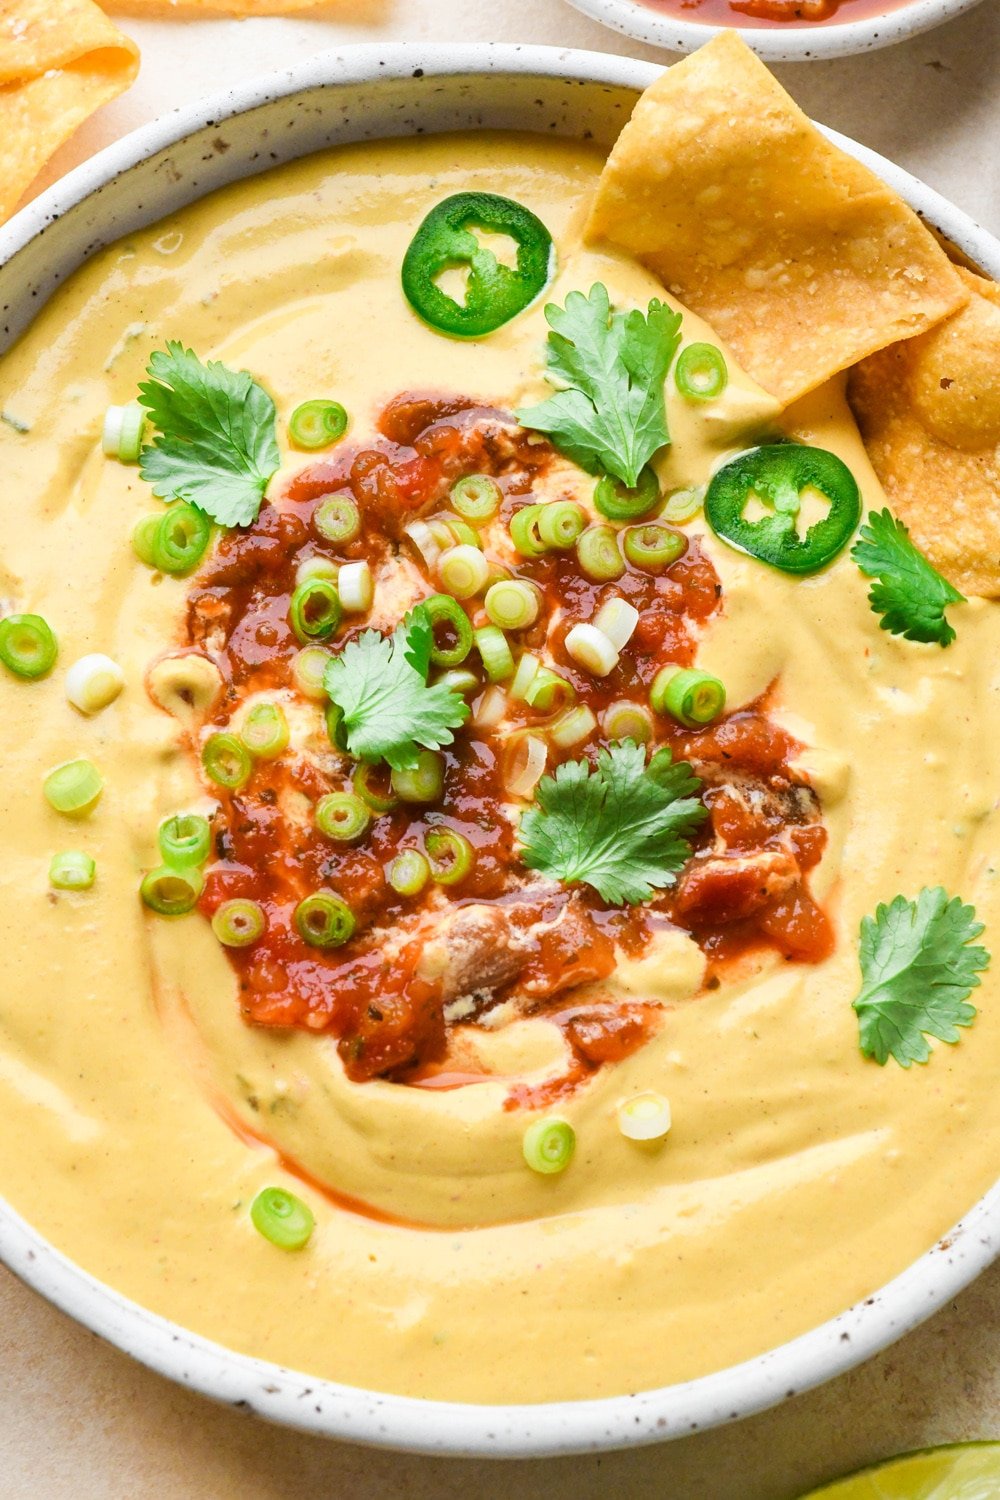 A medium sized shallow ceramic bowl filled with creamy cashew queso that is topped with a swirl of salsa, green onions, cilantro, and thinly sliced jalapeño. There are several chips dipped into the bowl to show the creamy texture.